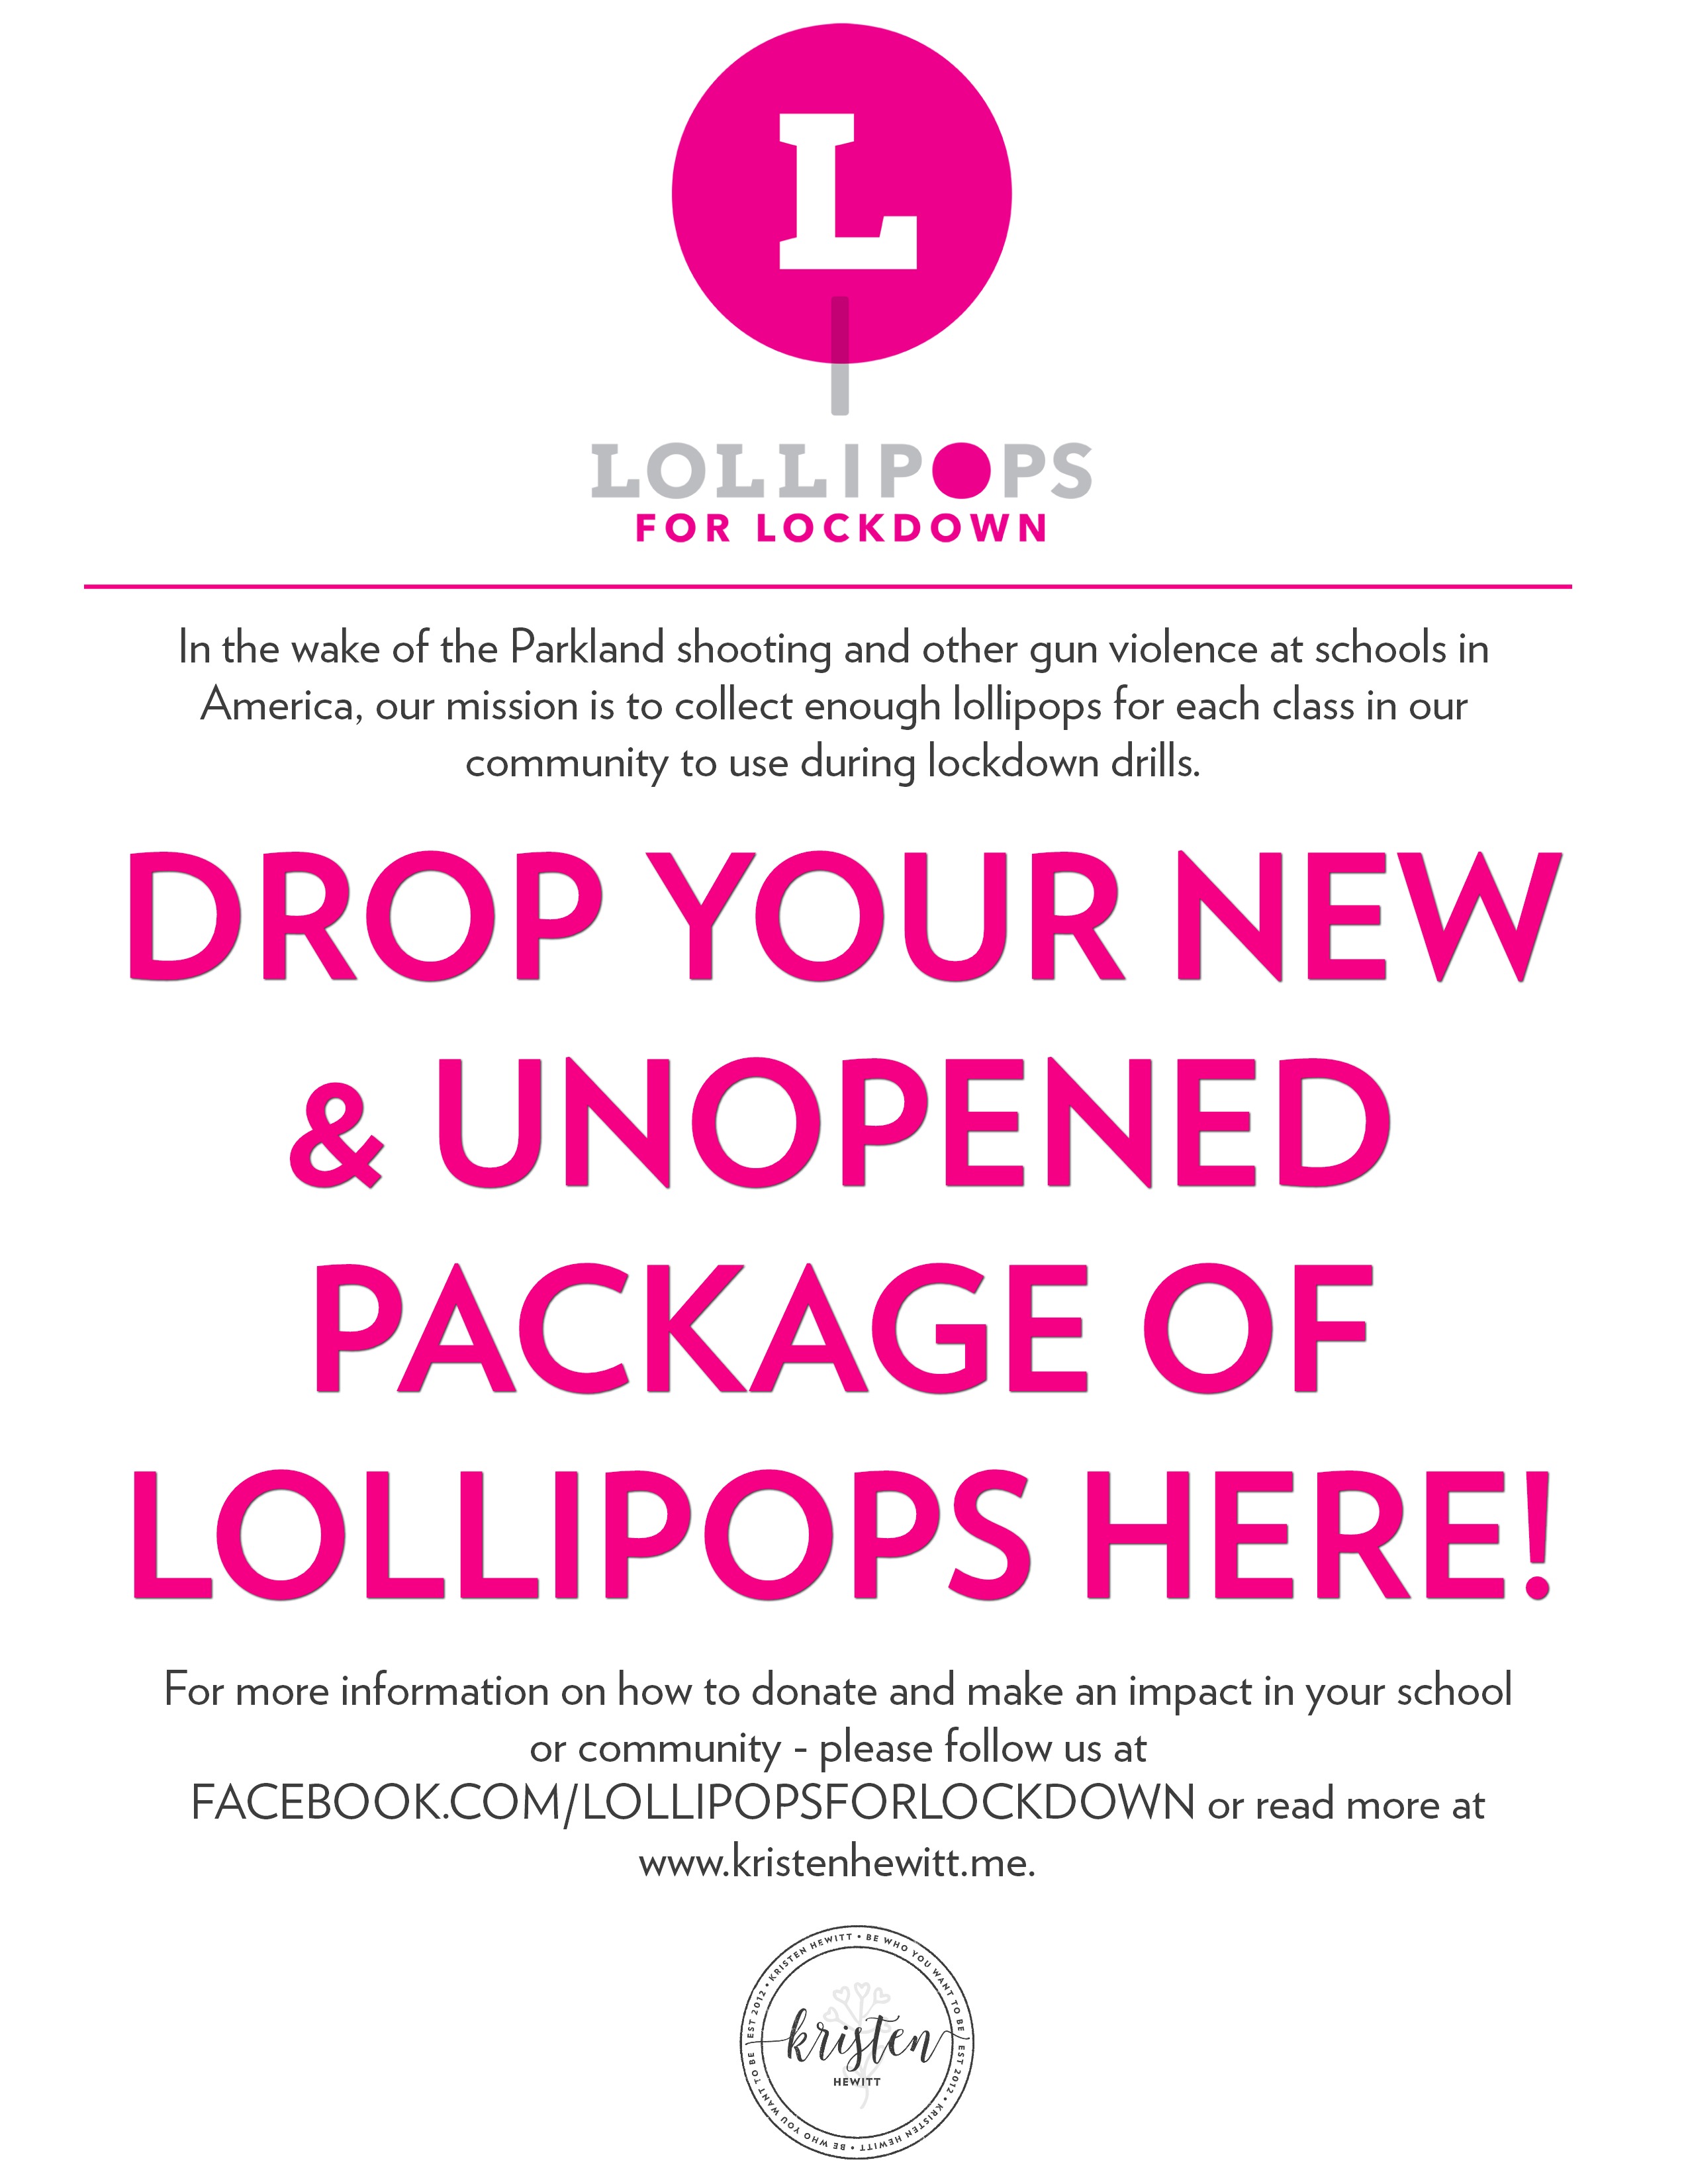 Looking for ways to help our schools during these troubled times? Then join us at Lollipops for Lockdowns and let's give our teachers and kids something simple to help make lockdown drills easier.